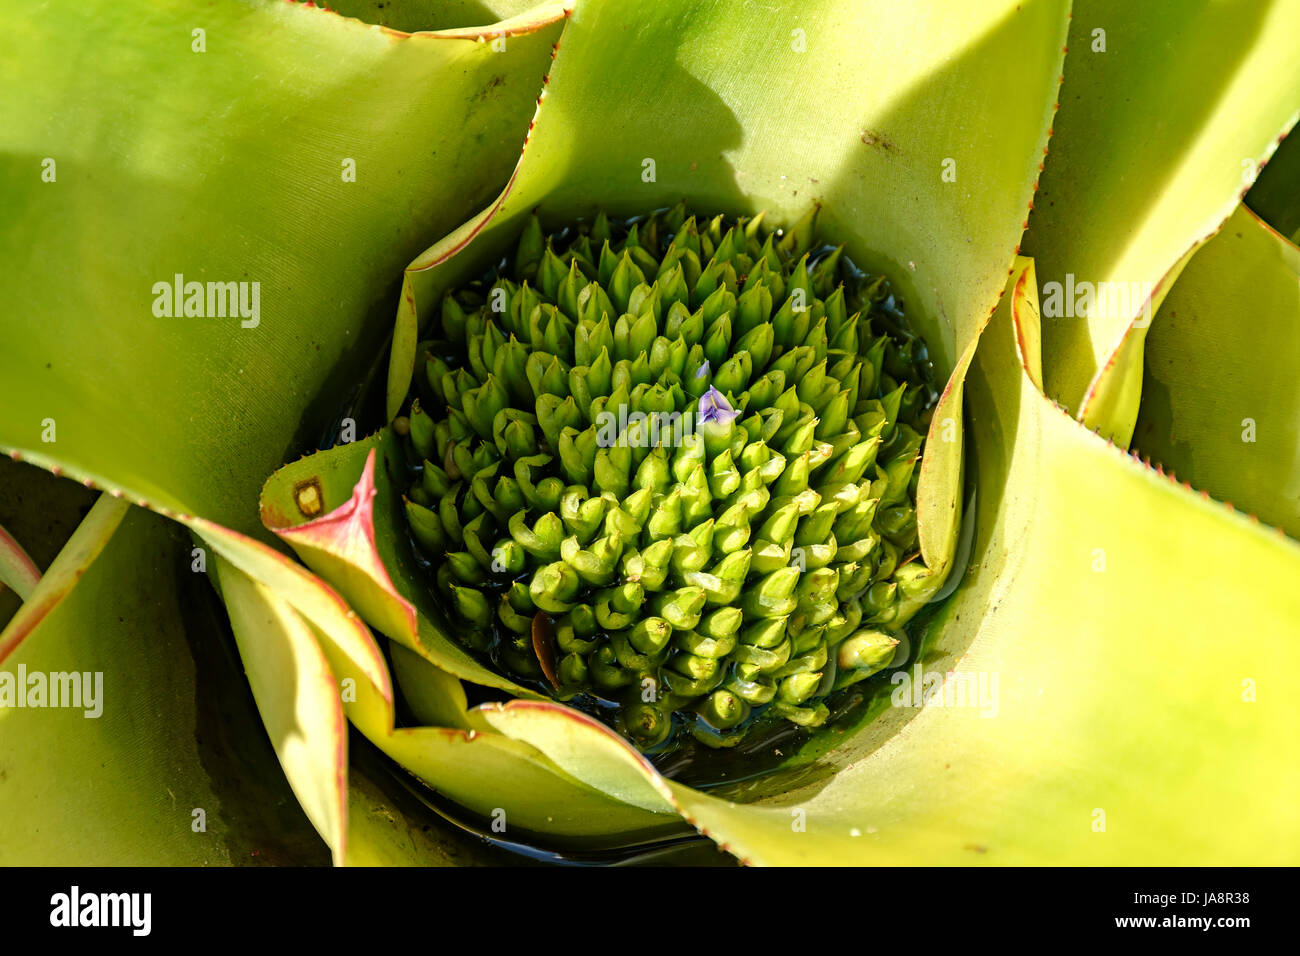 Detail of bromeliad with its leaves, circular shape, colors and texture features Stock Photo